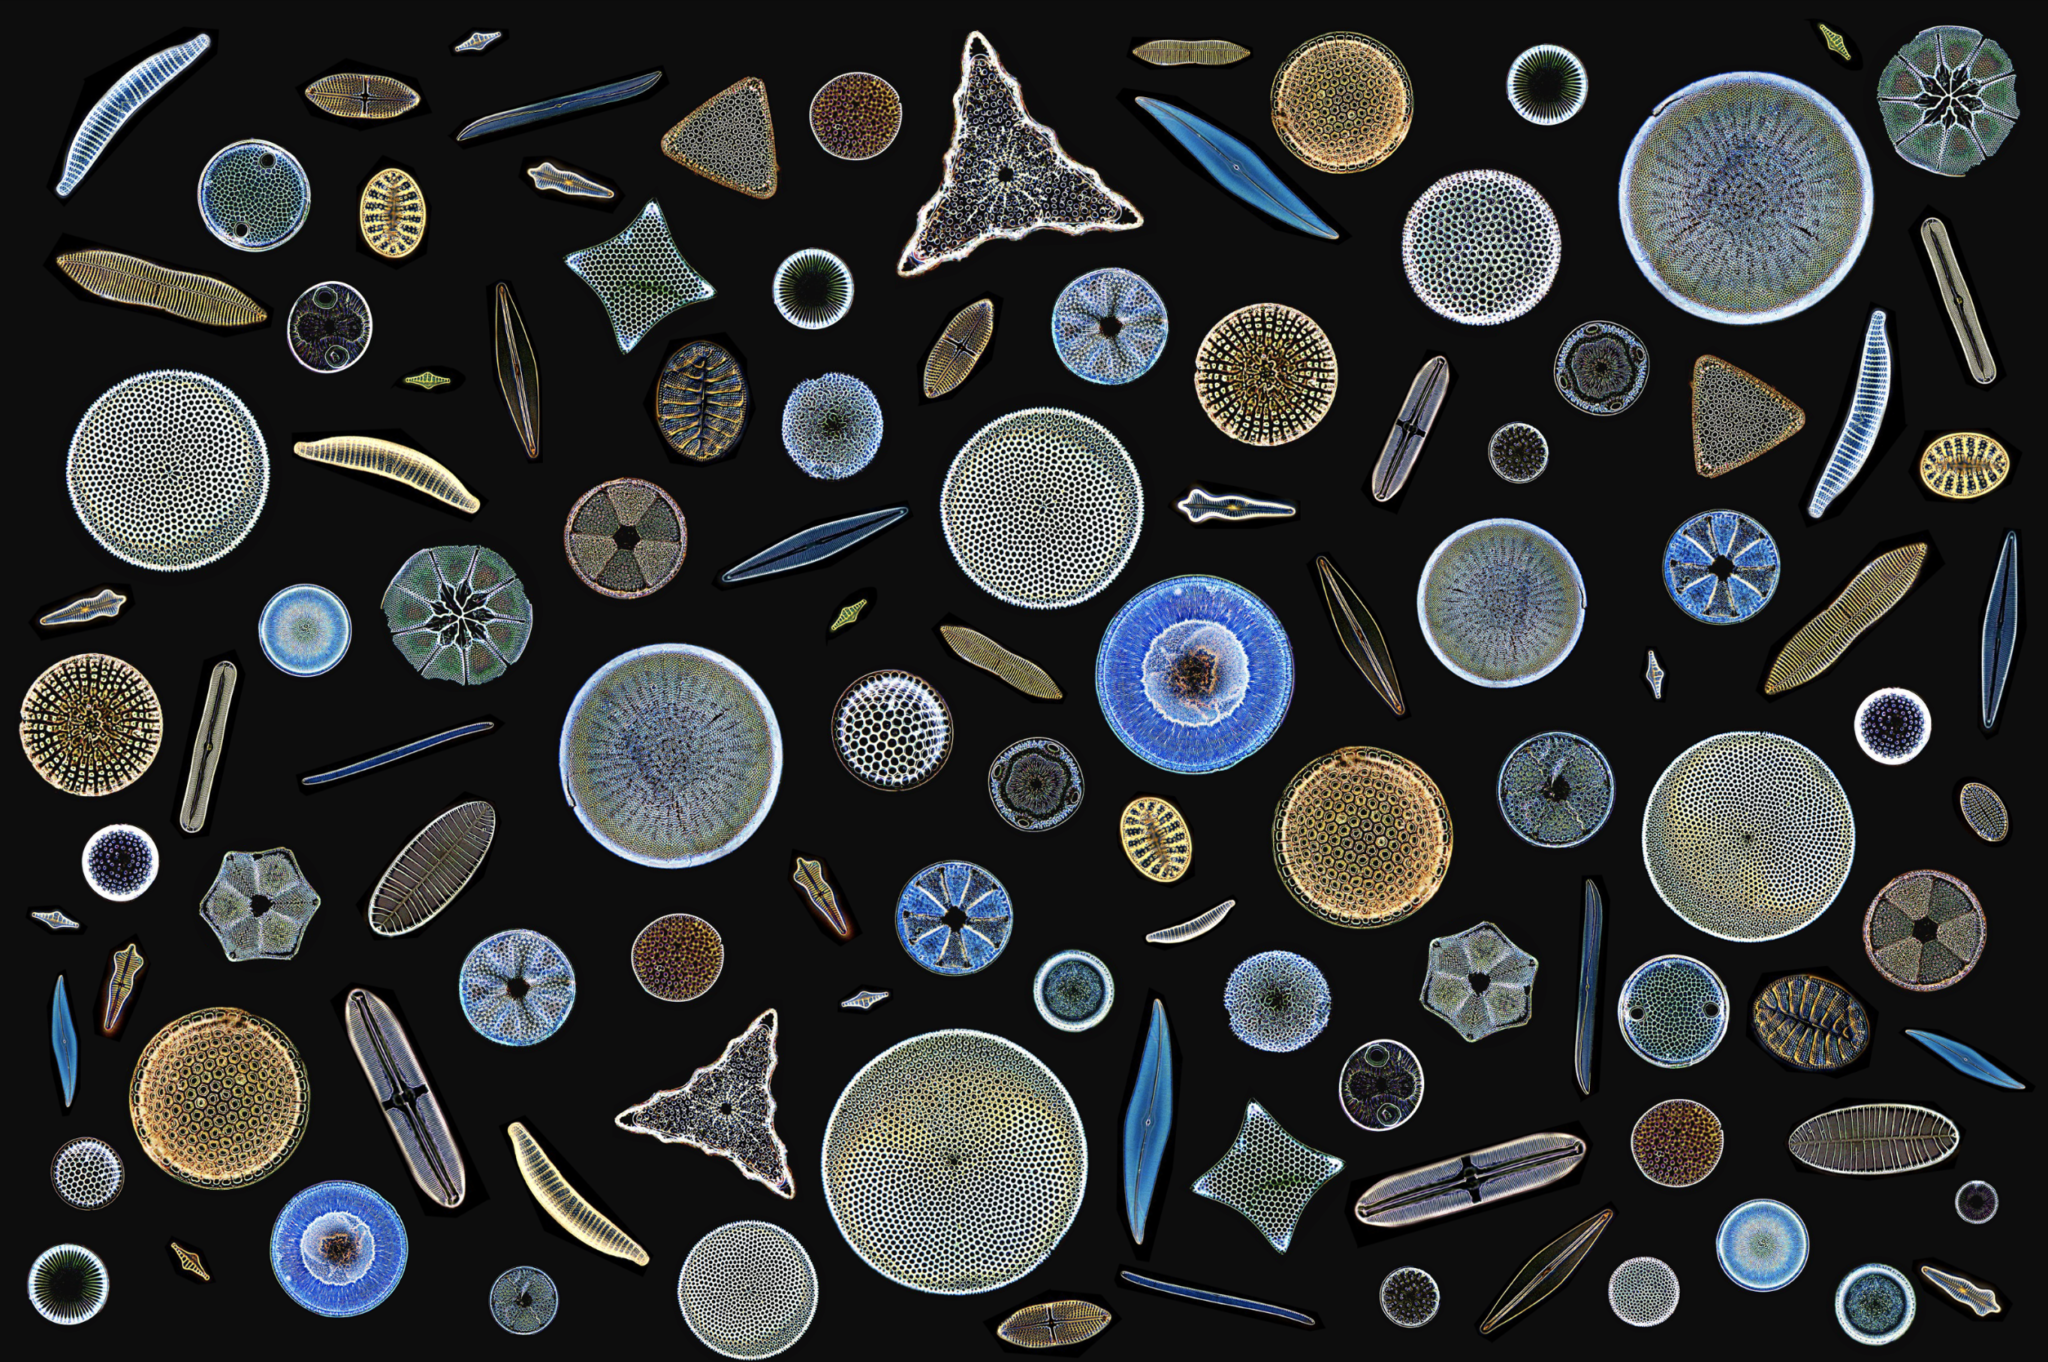 Diatoms are unicellular, non-flagellate algae that appeared in the Cretaceous period, about 145 million years ago. They represent one of the most important classes of microalgae in marine and freshwater environments.